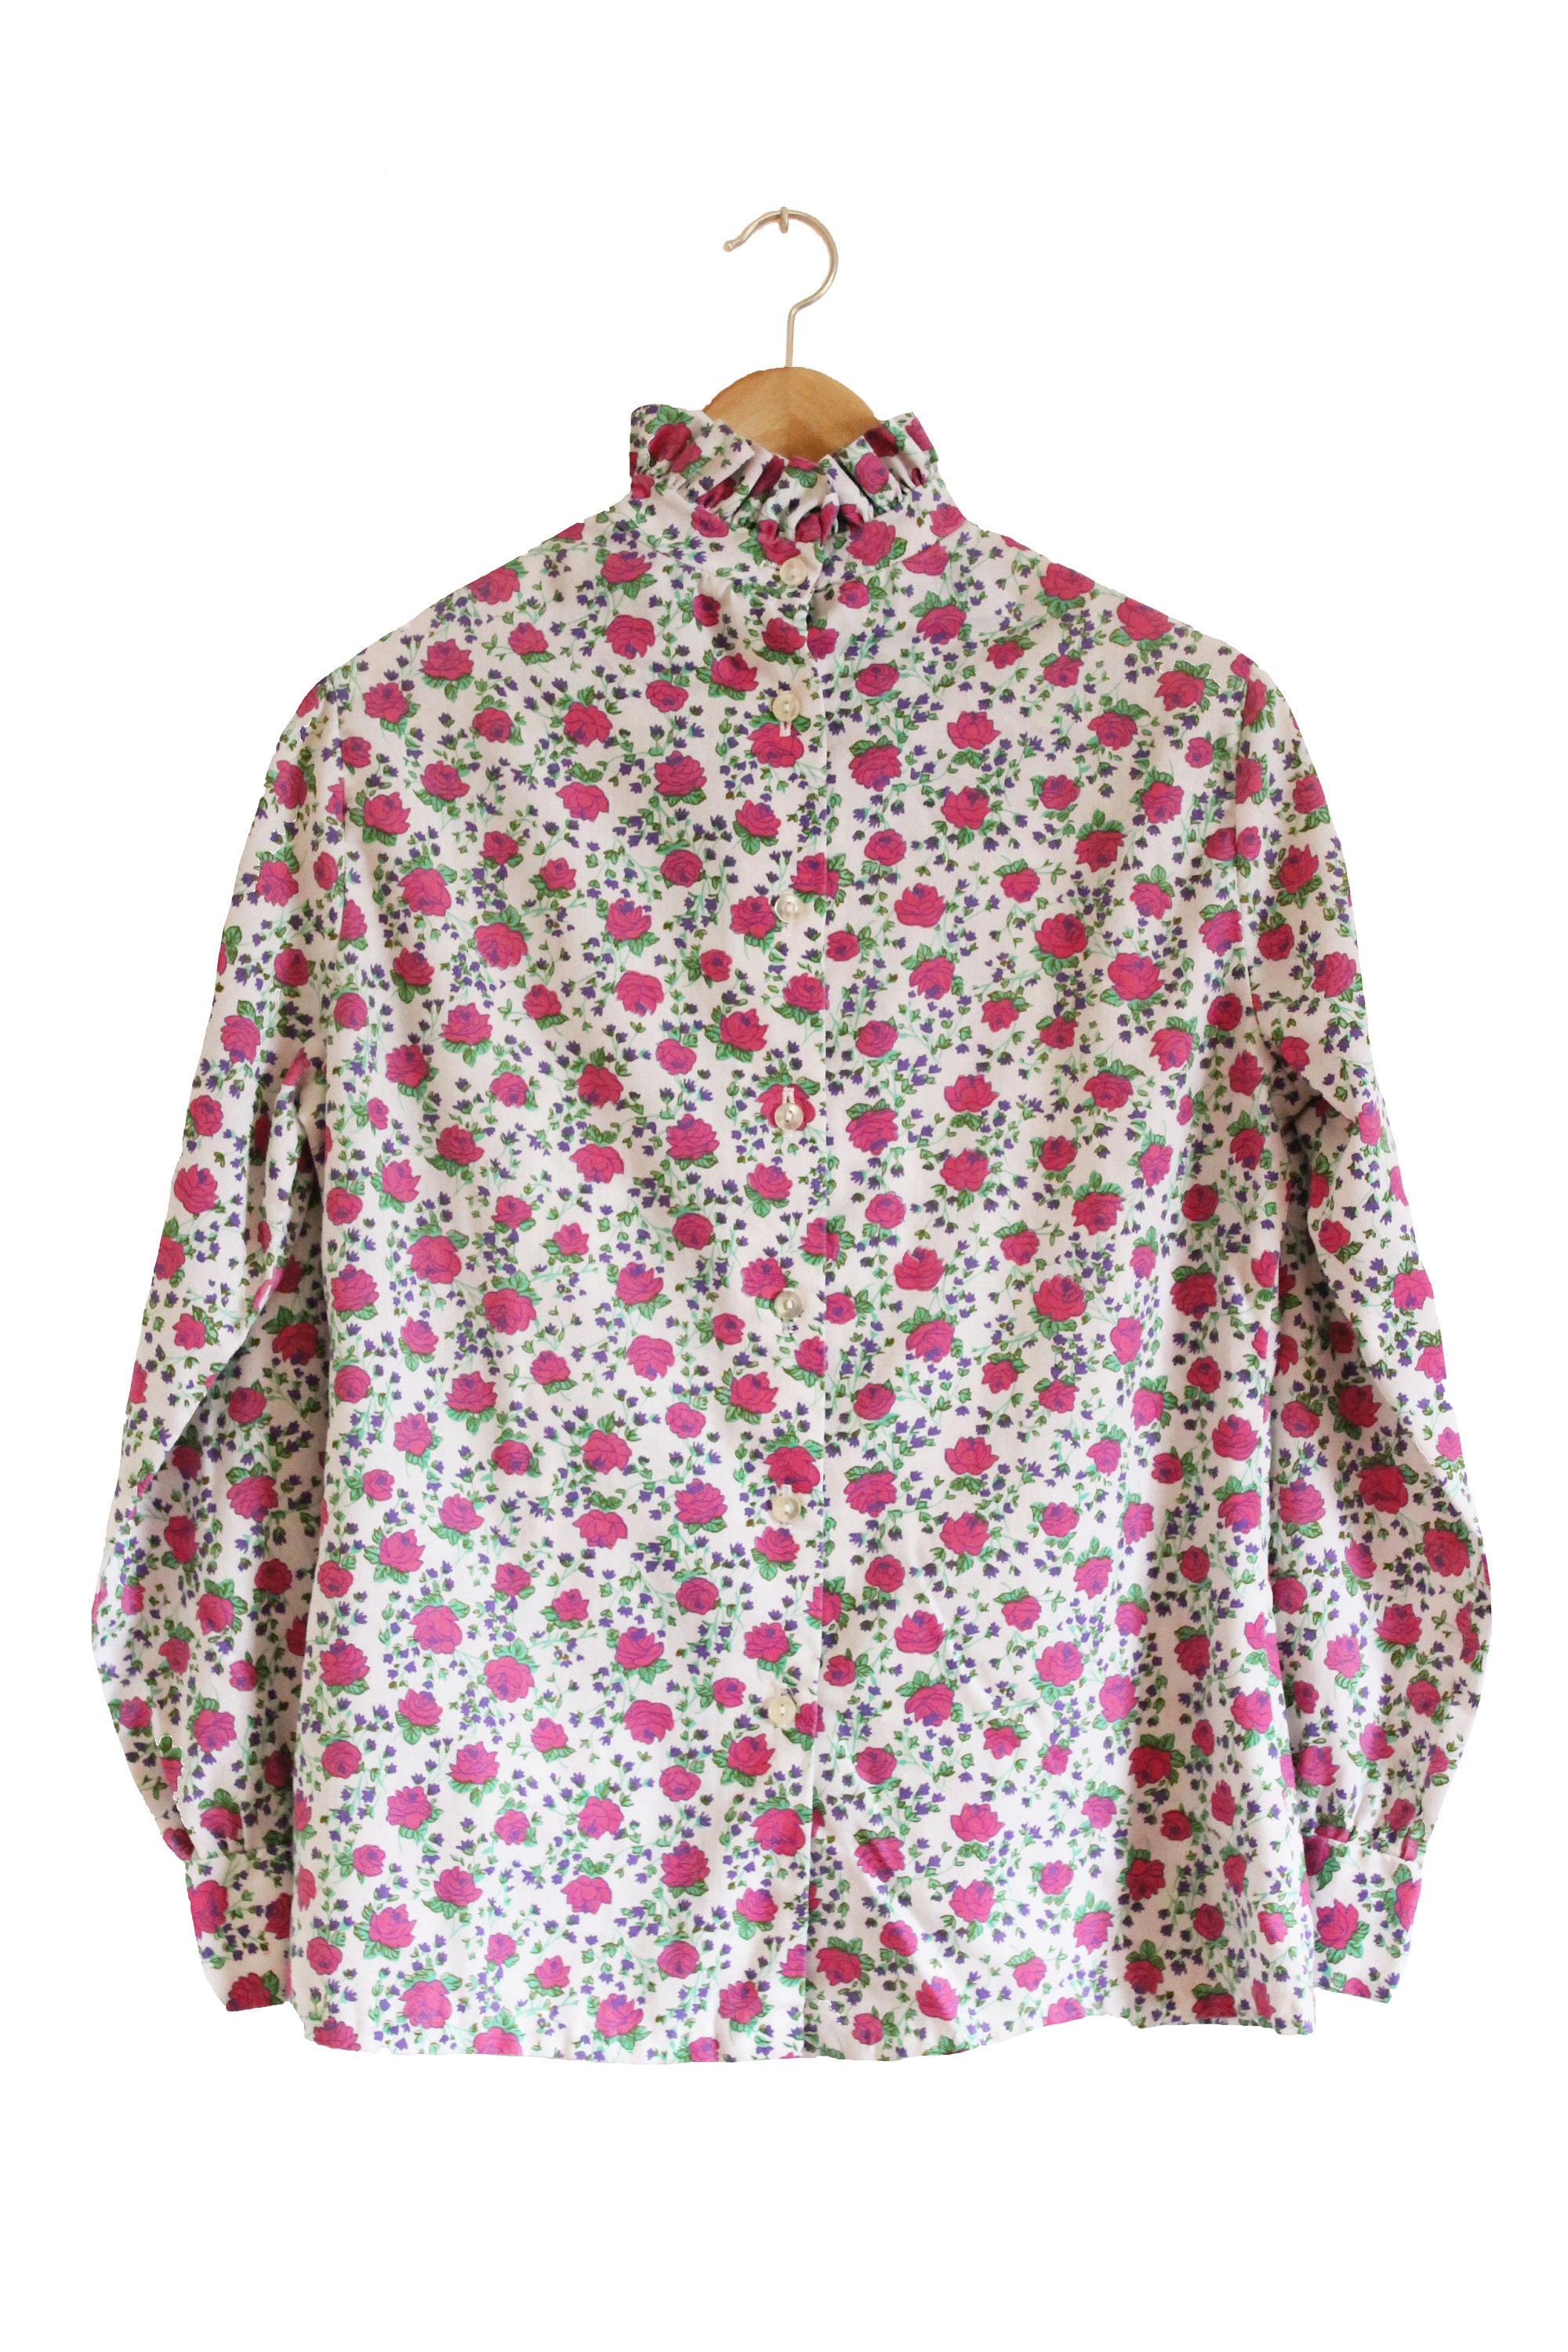 Vintage Button up Floral Blouse by Montgomery Ward 70s - Etsy